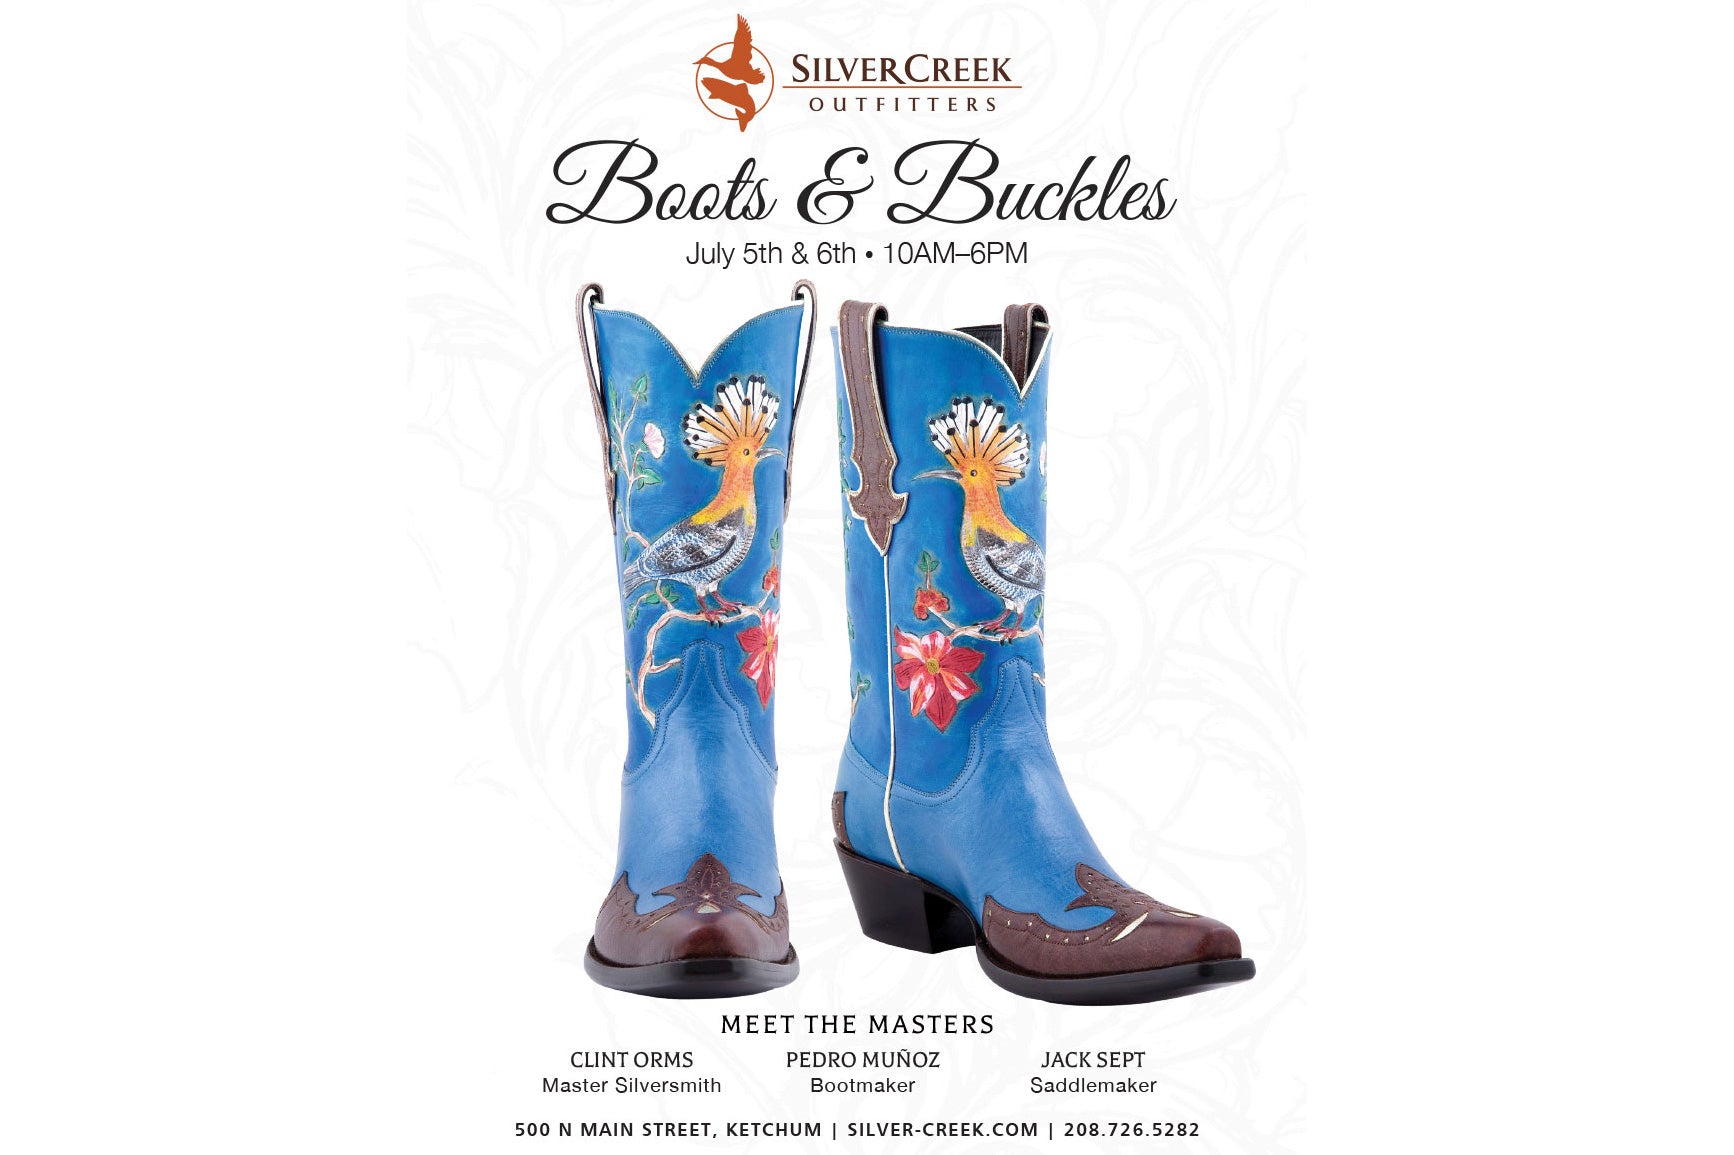 2019 Boots & Buckles – Meet The Masters.